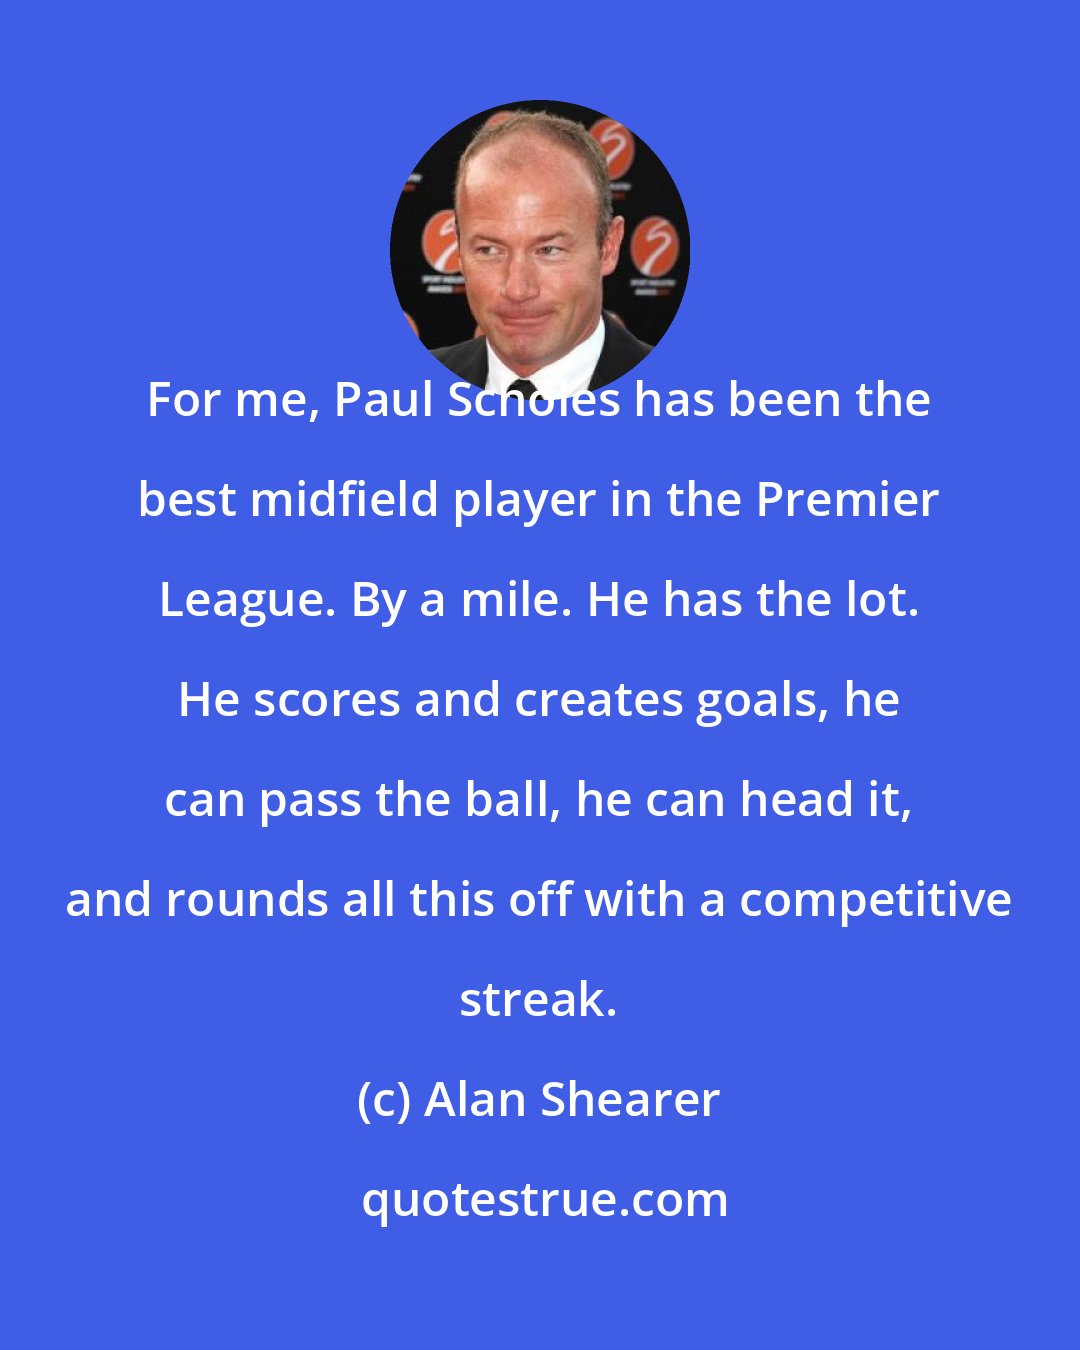 Alan Shearer: For me, Paul Scholes has been the best midfield player in the Premier League. By a mile. He has the lot. He scores and creates goals, he can pass the ball, he can head it, and rounds all this off with a competitive streak.